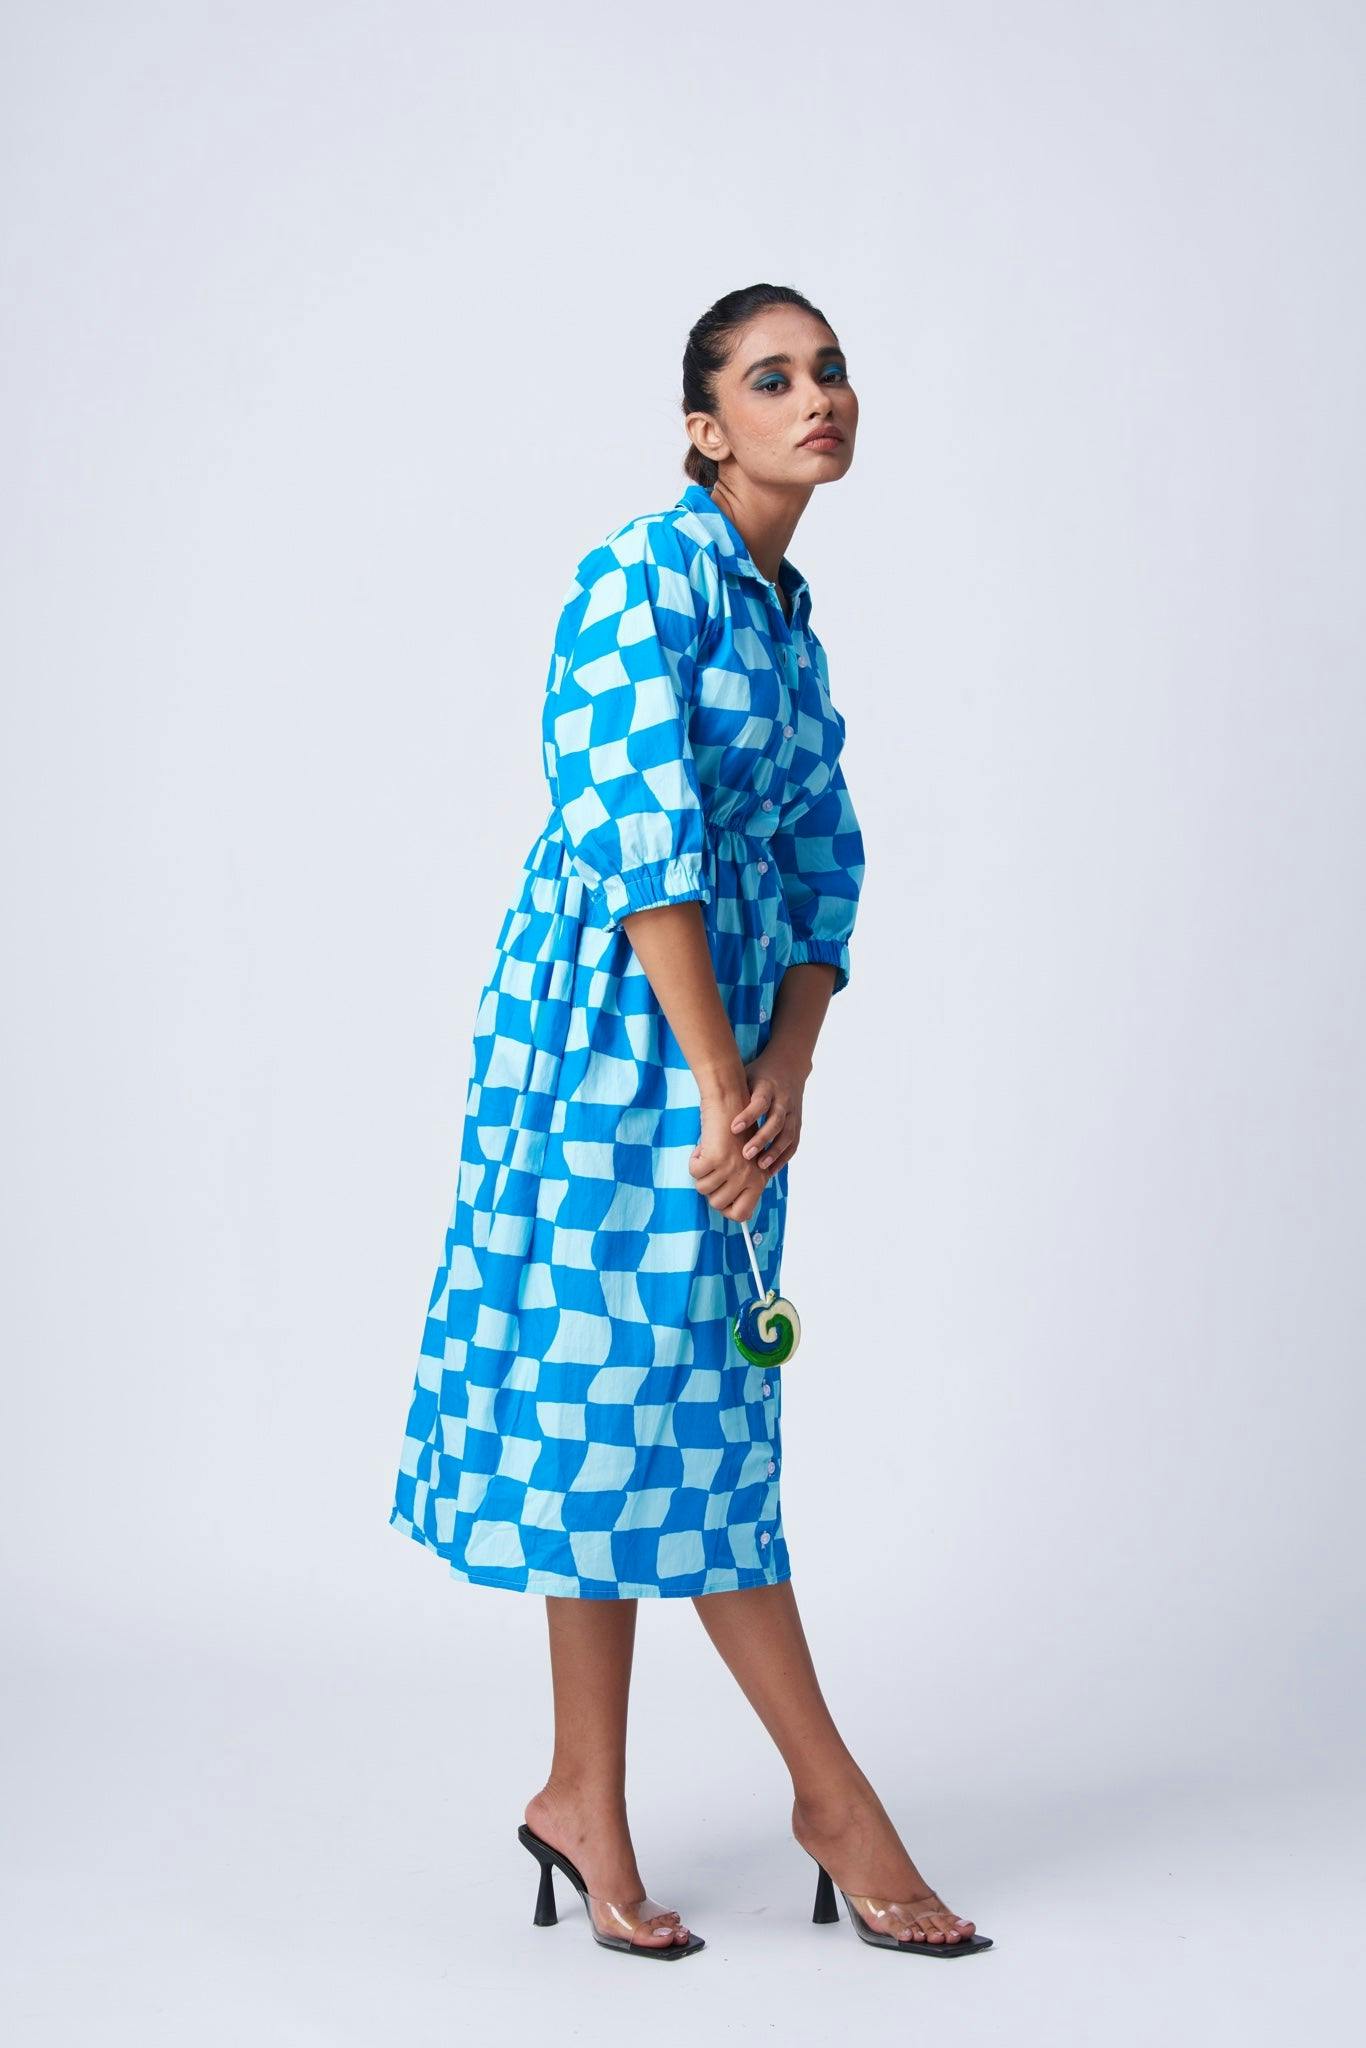 Brunch at maestro (midi dress), a product by Radharaman